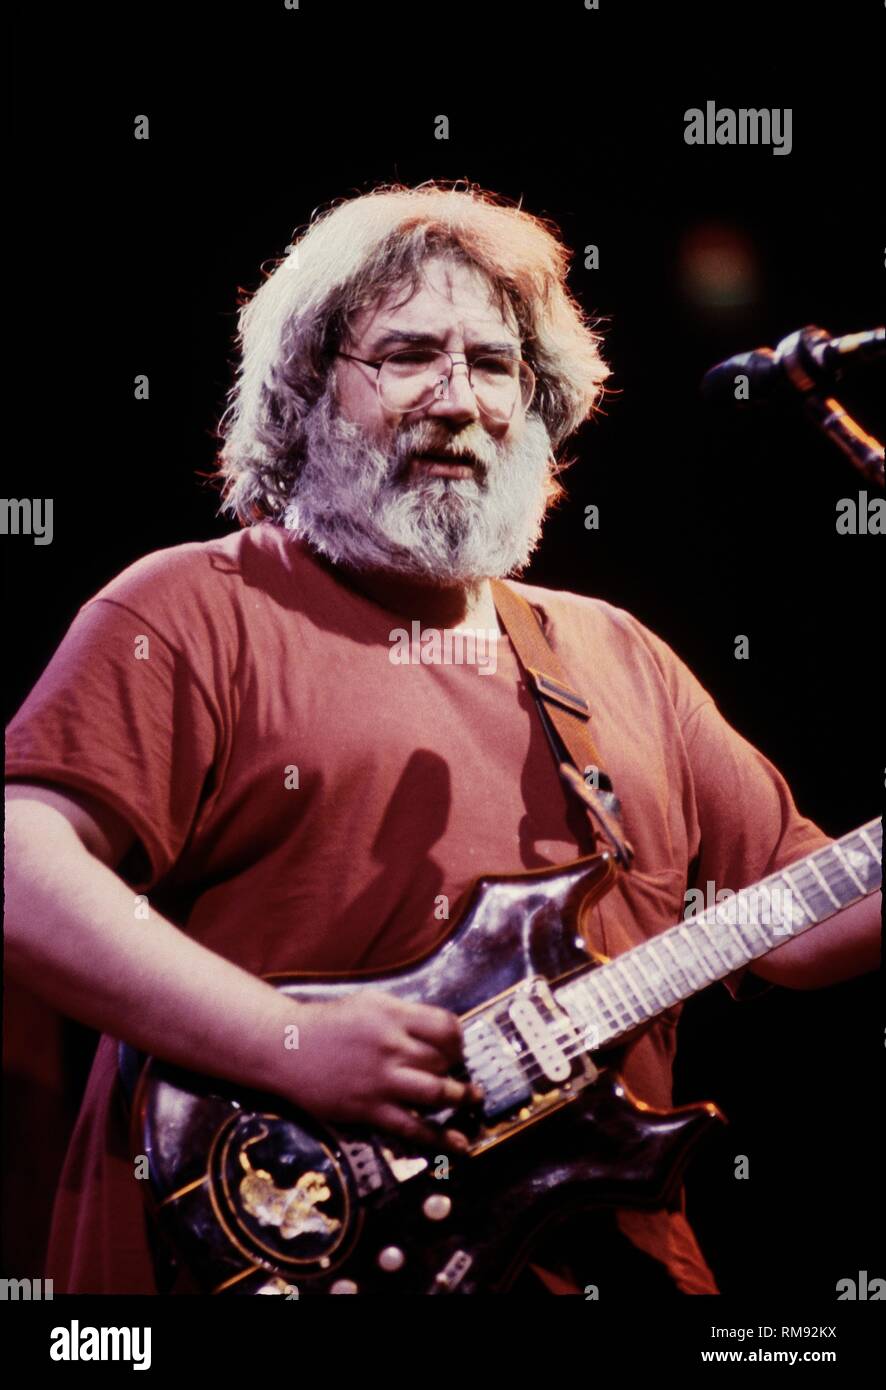 Singer, songwriter and guitarist Jerry Garcia of the Grateful Dead is shown performing on stage during a 'live' concert appearance. Stock Photo